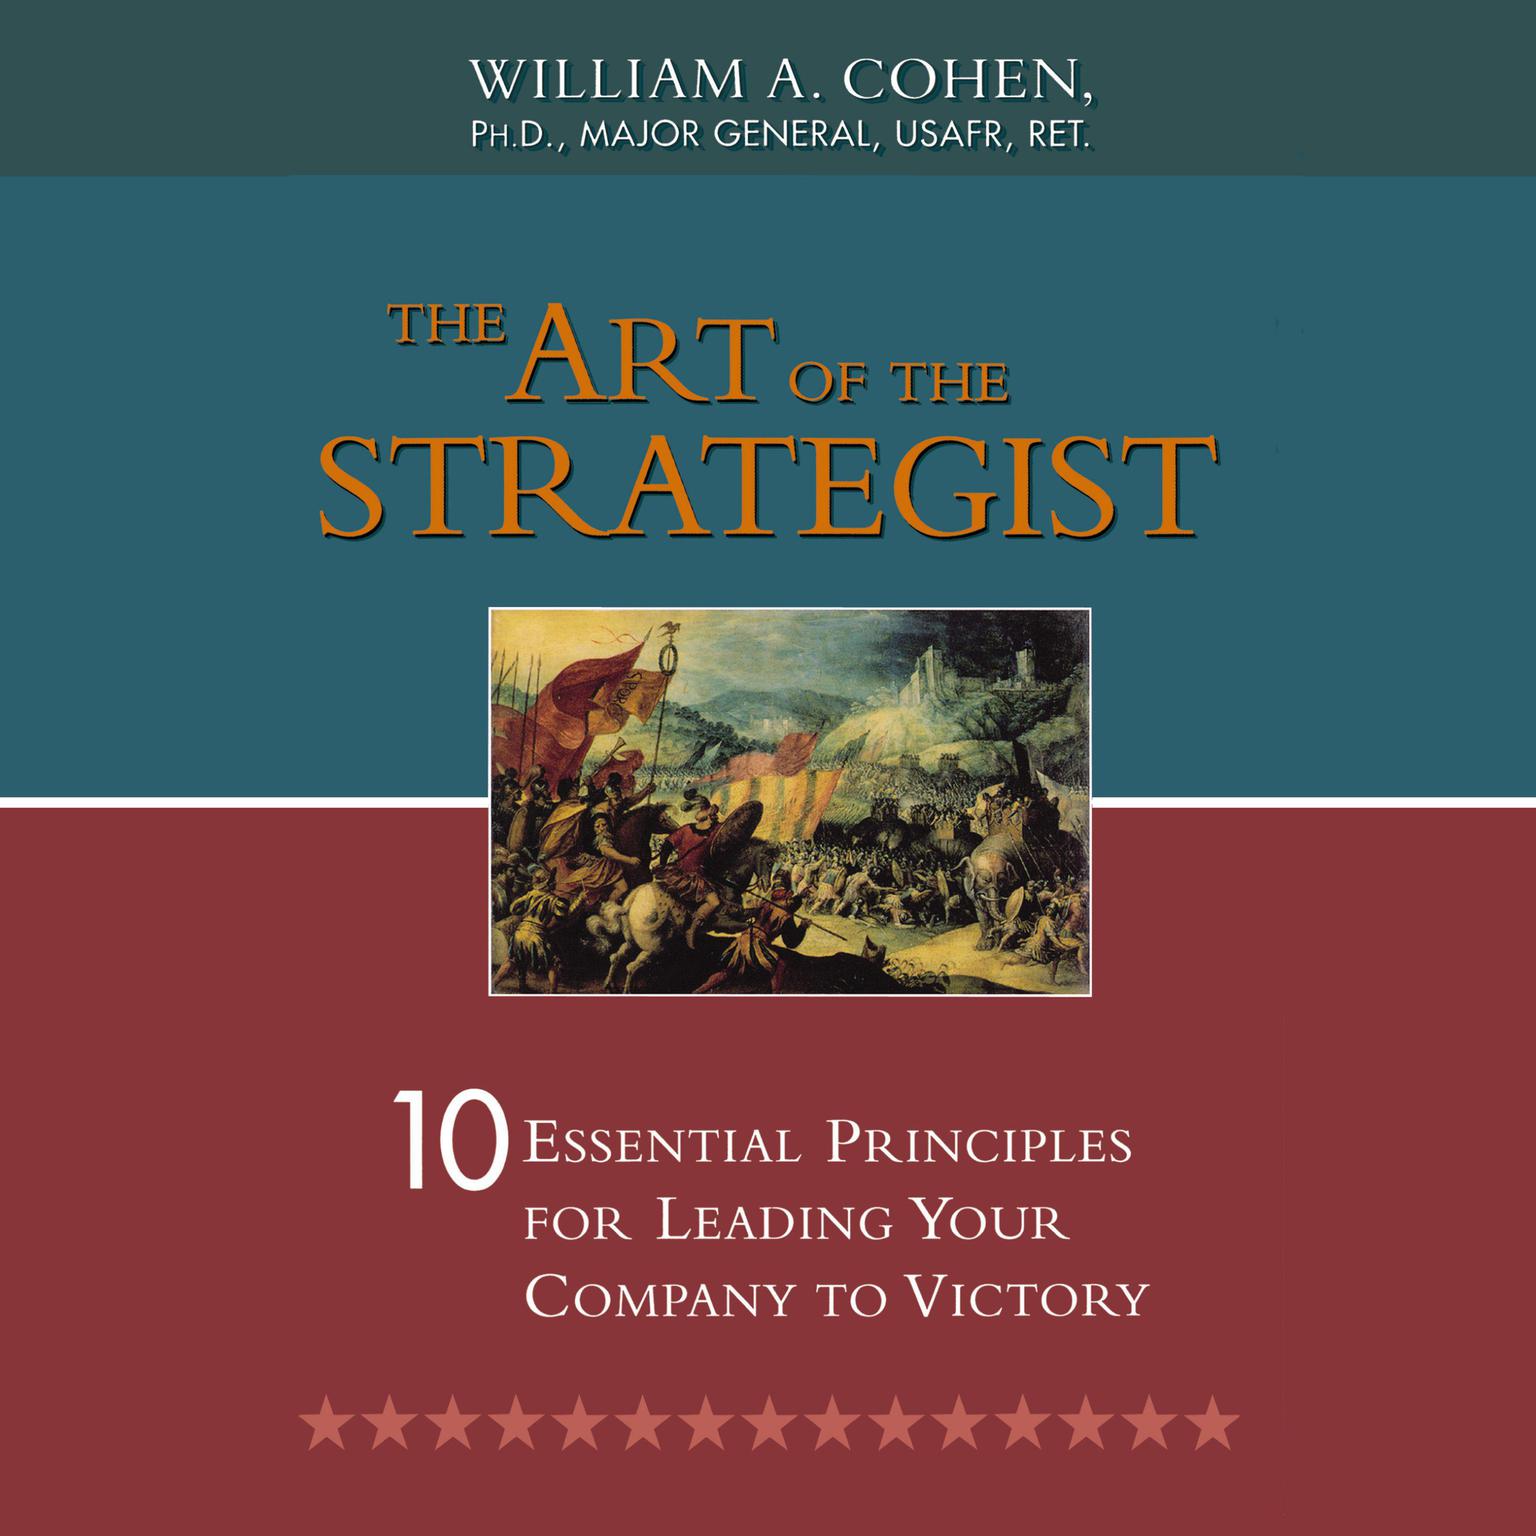 The Art of the Strategist: 10 Essential Principles for Leading Your Company to Victory Audiobook, by William A. Cohen